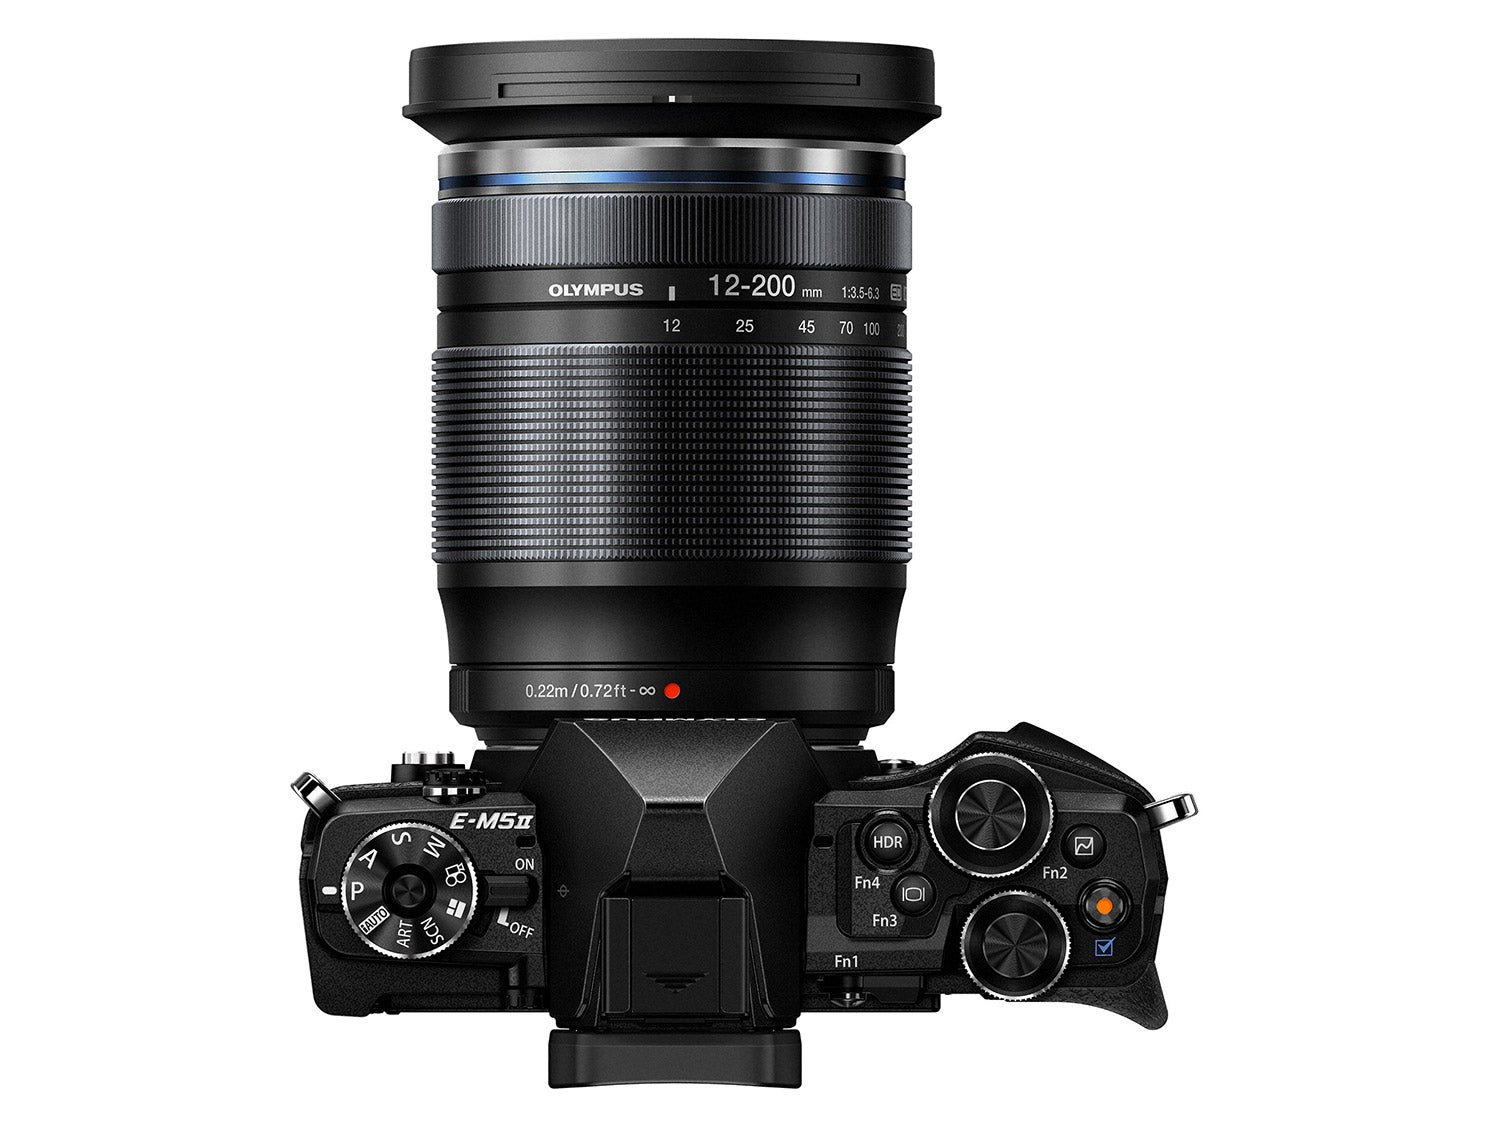 Olympus M.Zuiko Digital ED 12-200mm f/3.5-6.3 lens will be the highest  magnification available on an ILC mirrorless system